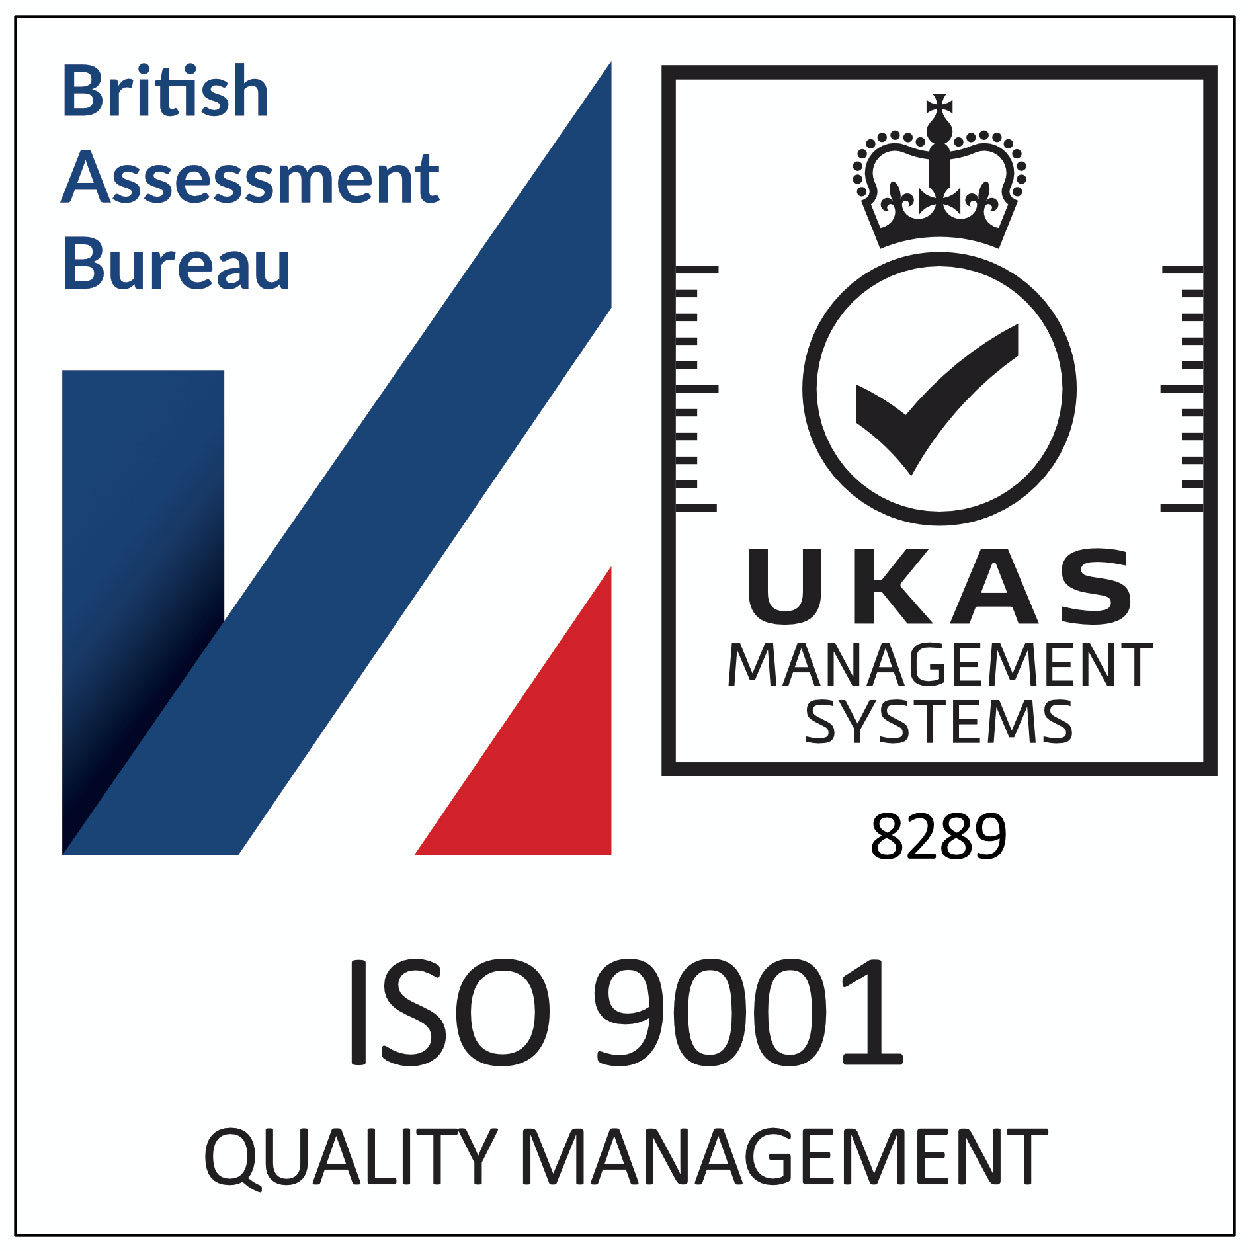 https://onecall24.co.uk/wp-content/uploads/2020/11/ISO-900-quality-management-02.jpg